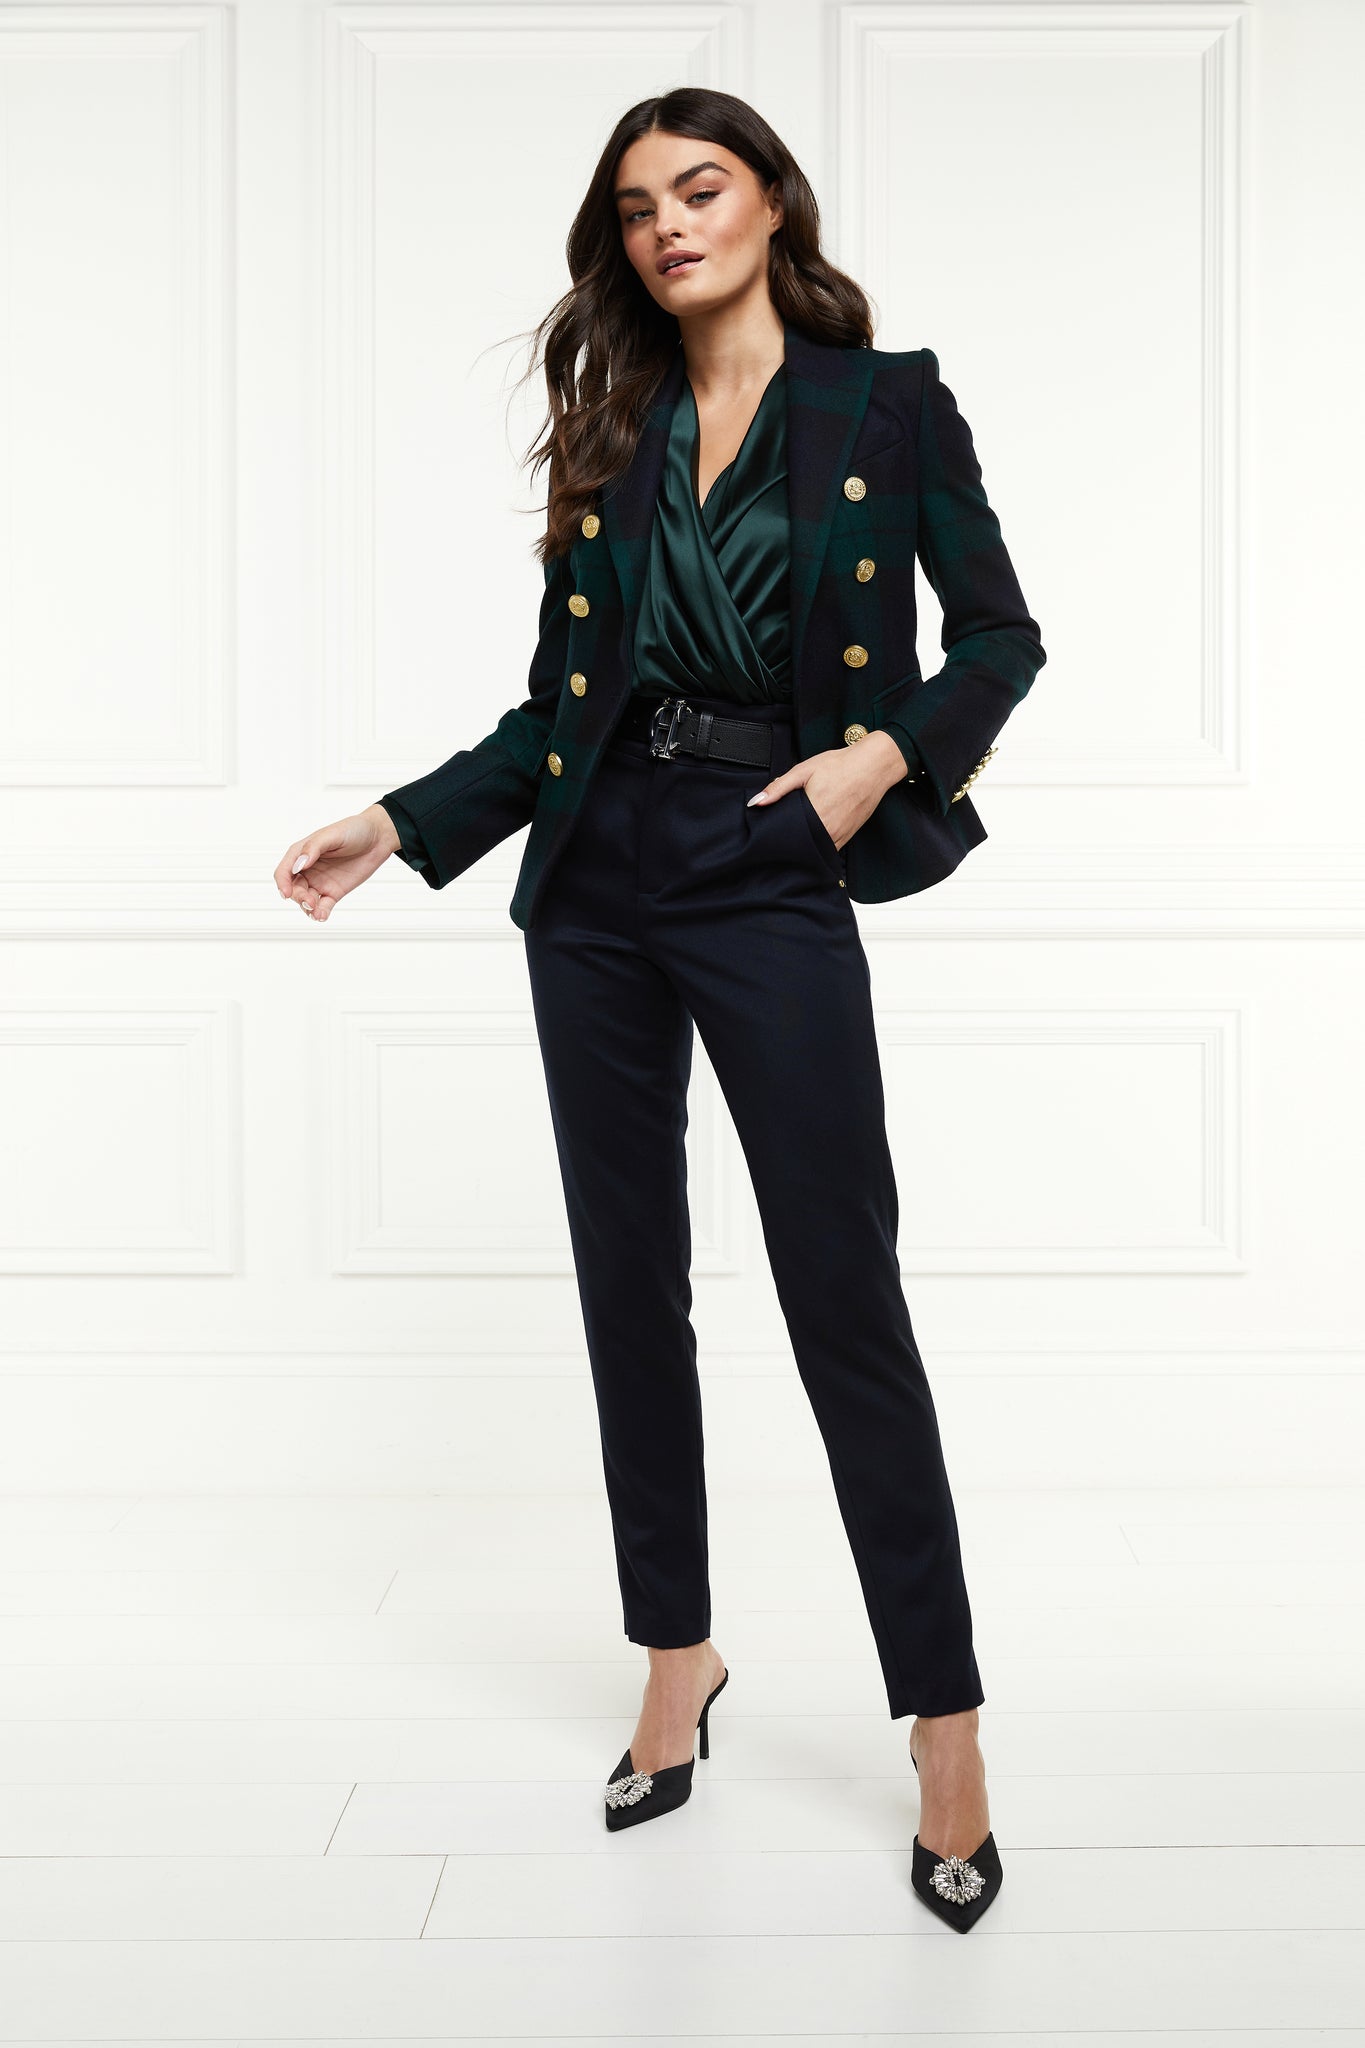 British made double breasted blazer that fastens with a single button hole to create a more form fitting silhouette with two pockets and gold button detailing this blazer is made from navy and green blackwatch tartan worn with emerald green silk shirt and black tailored trousers